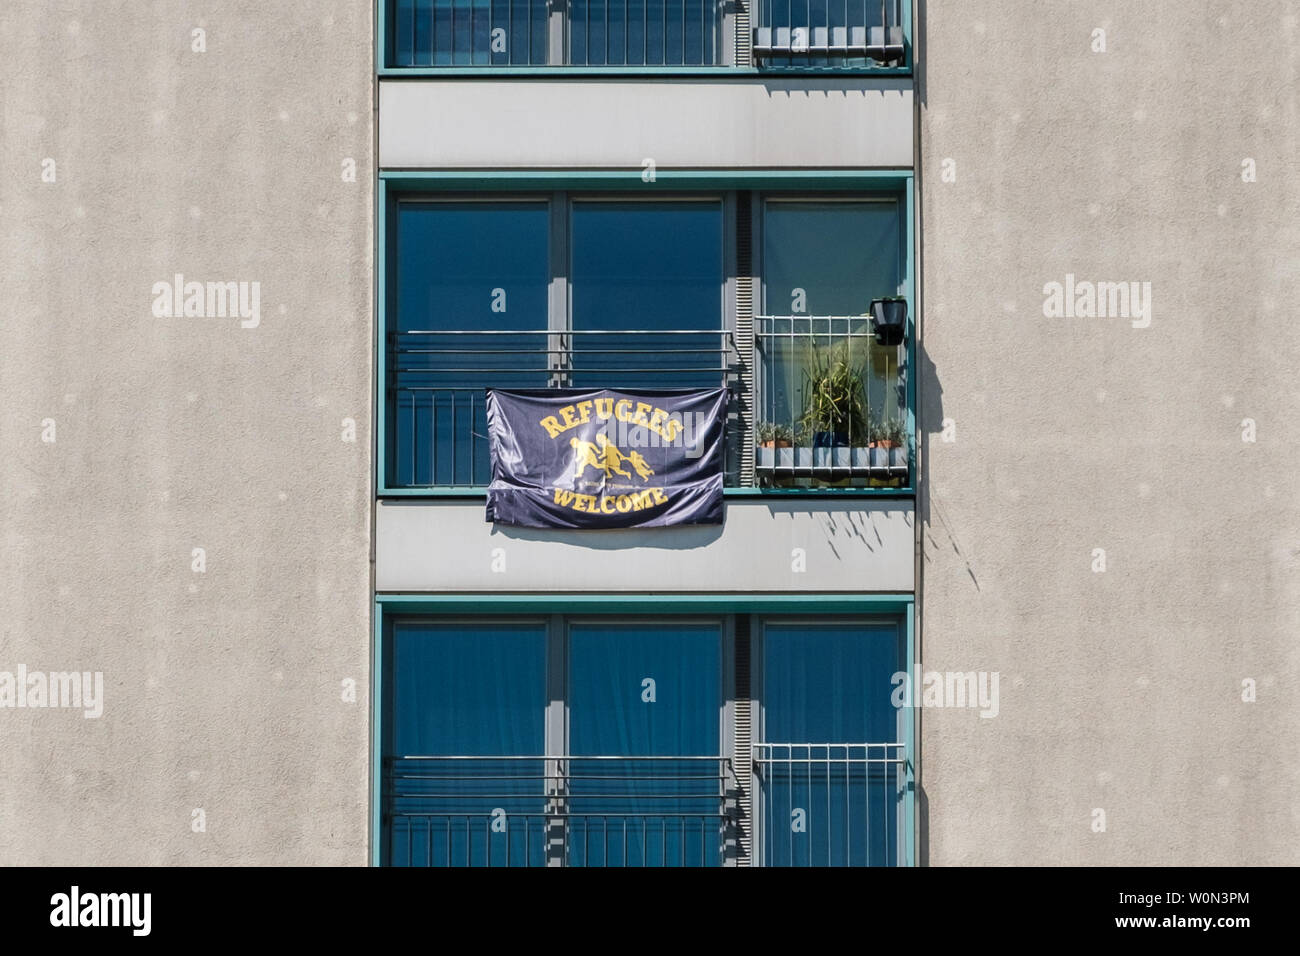 Berlin, Germany - June, 2019: Refugees welcome banner hanging on window of a residential building  in Berlin, Germany Stock Photo